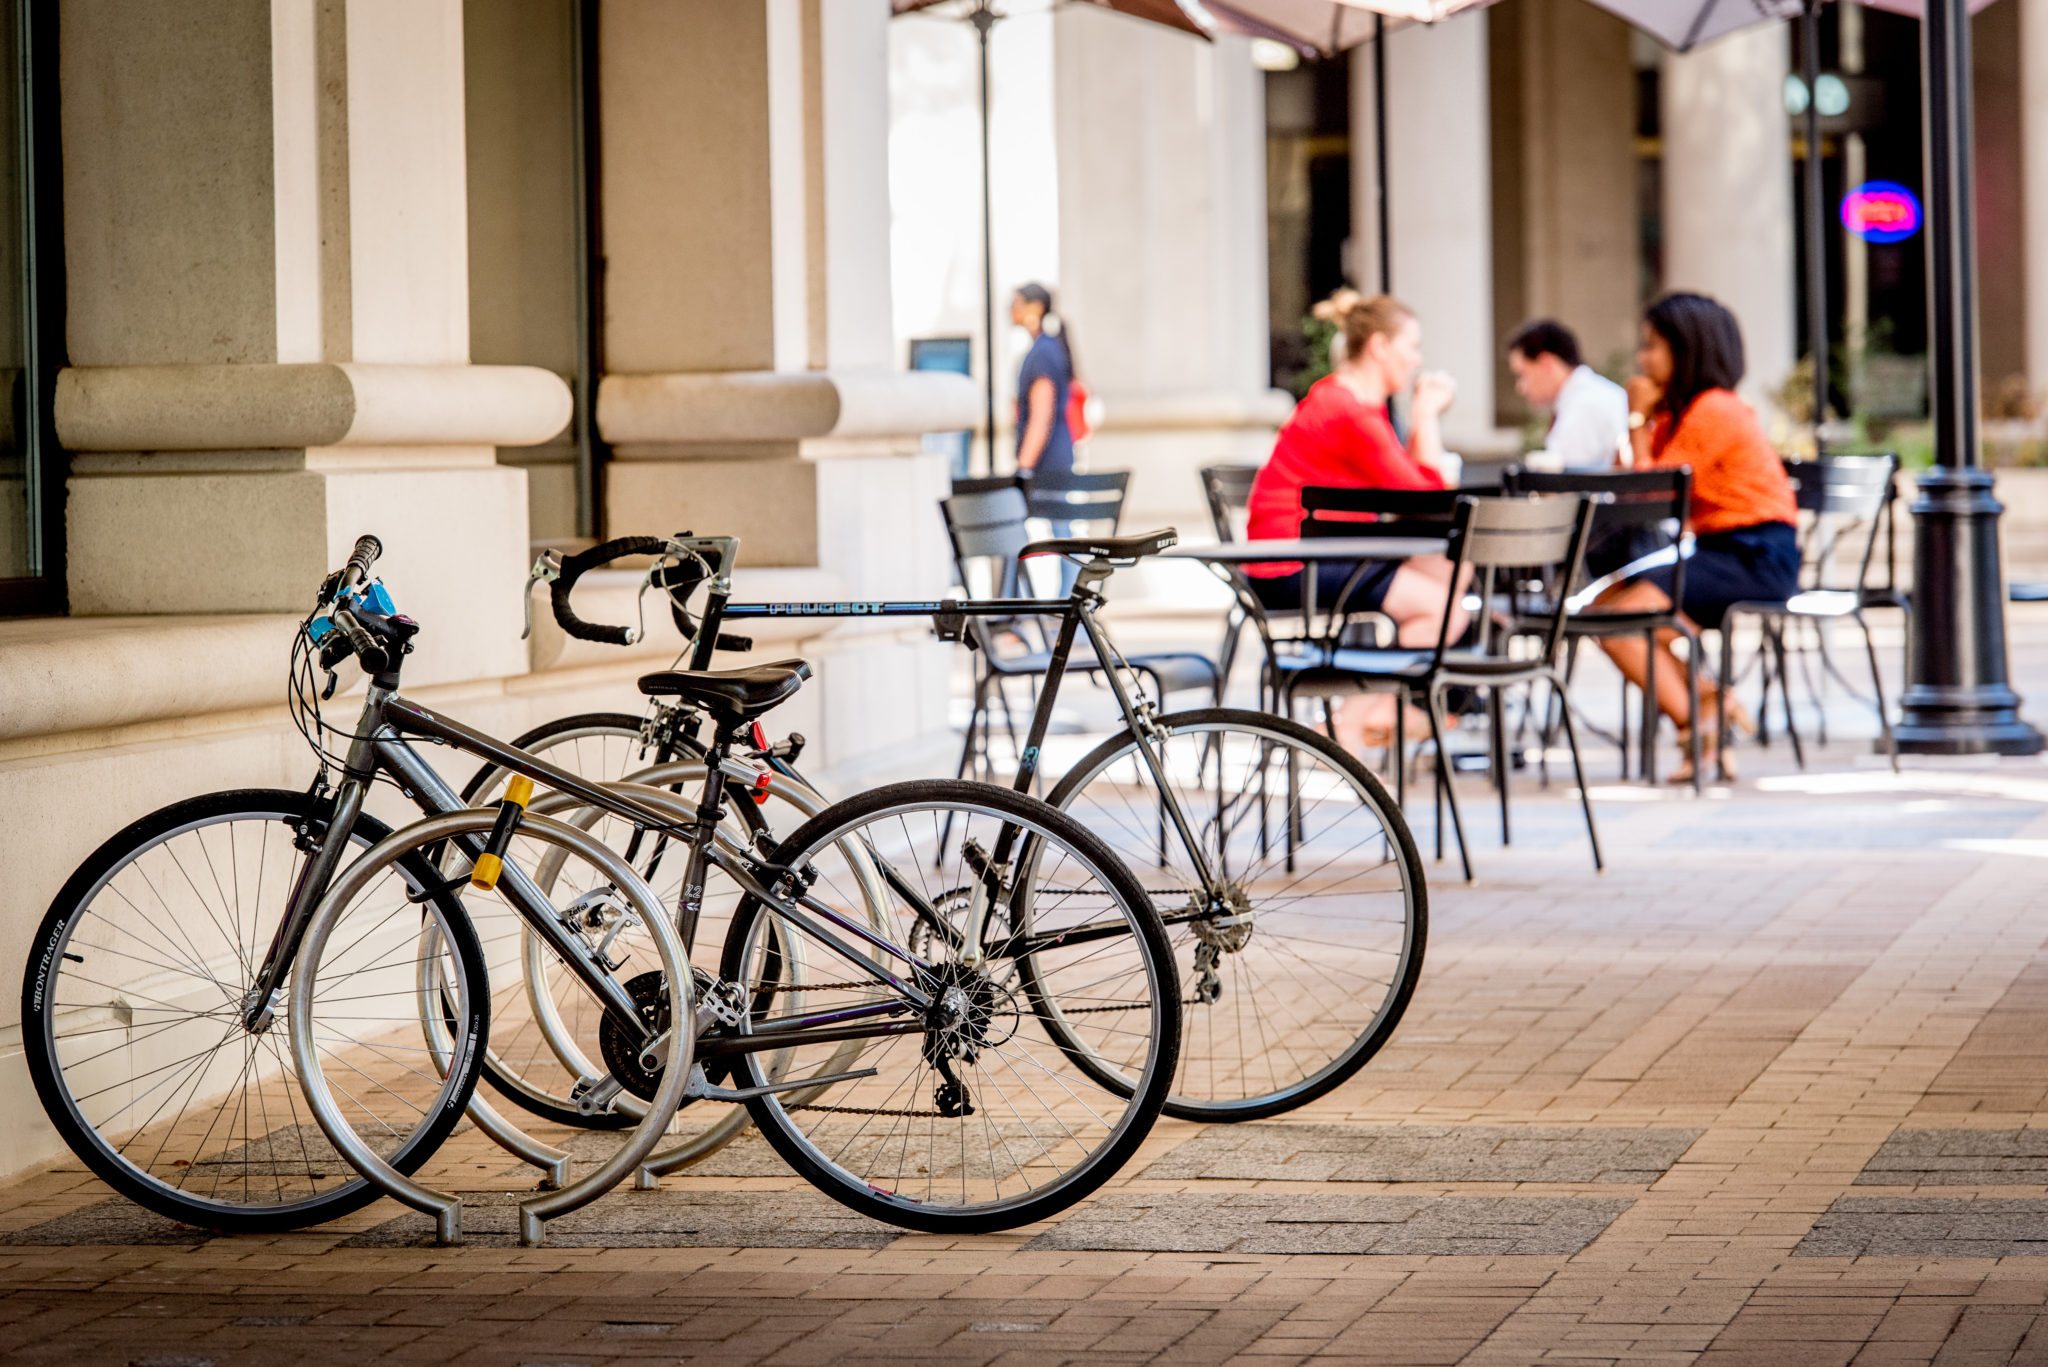 Two bike racks locked to racks in the foreground with people having coffee in the background